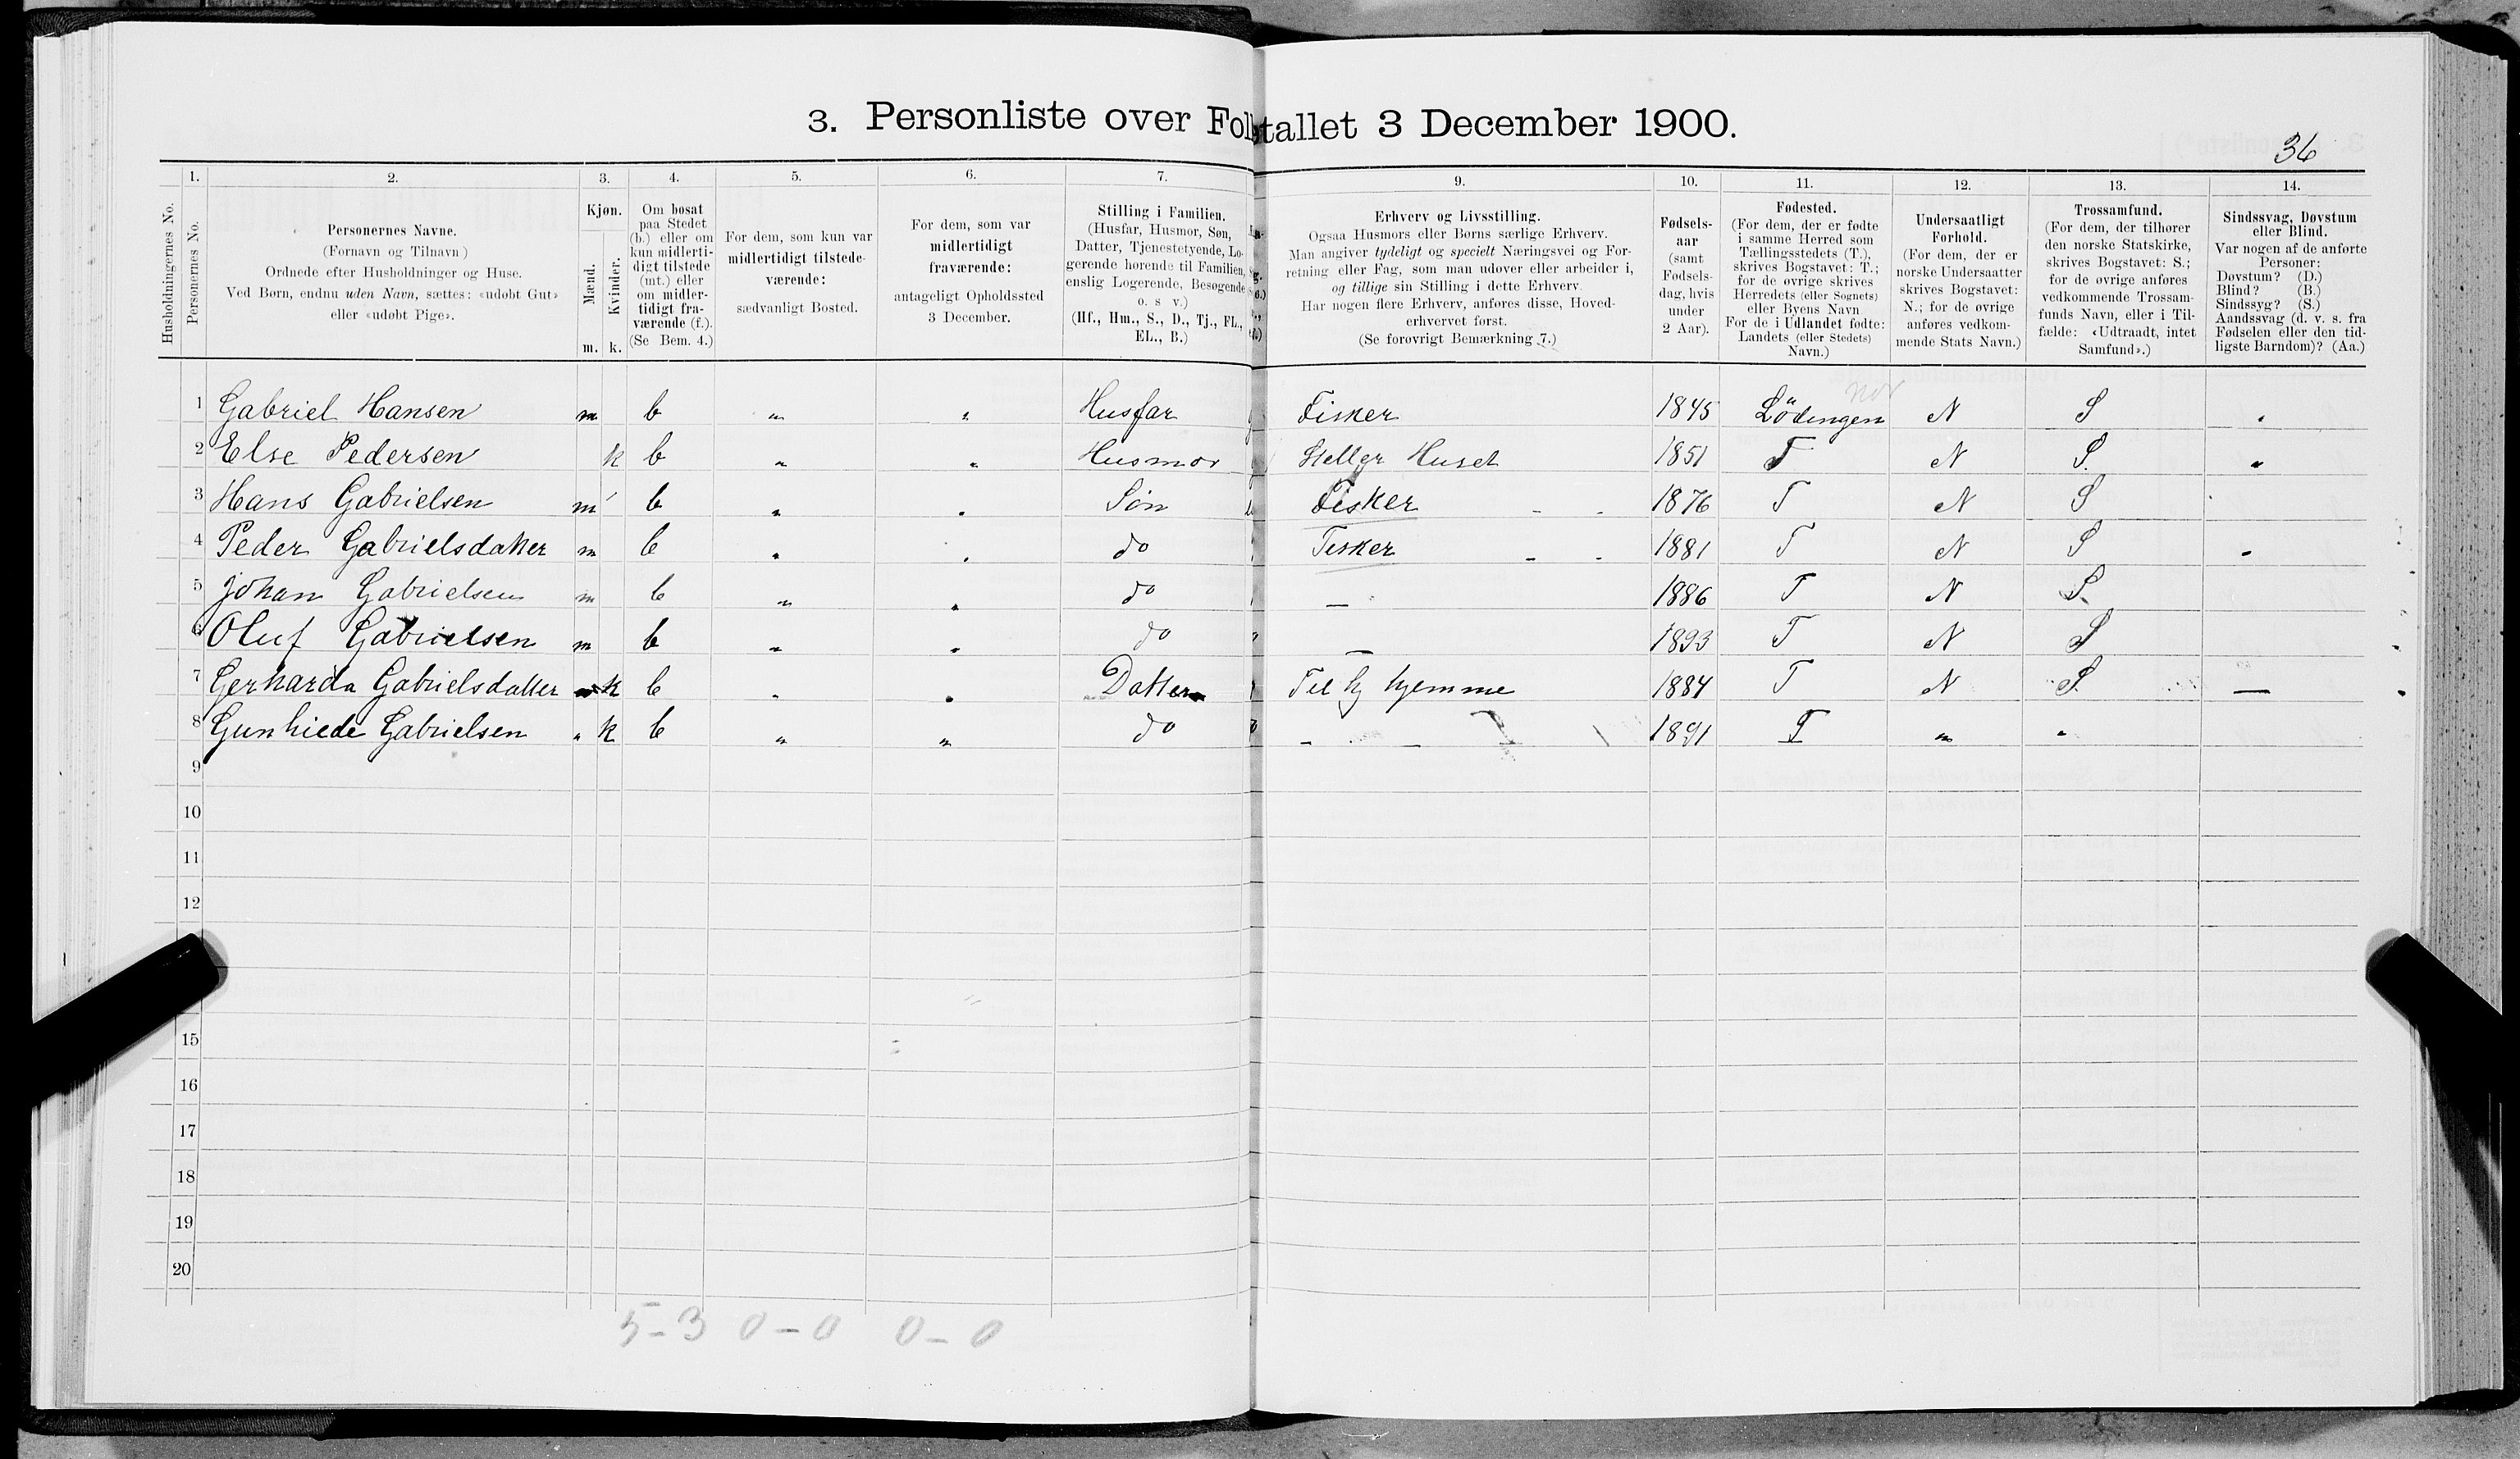 SAT, 1900 census for Tysfjord, 1900, p. 49